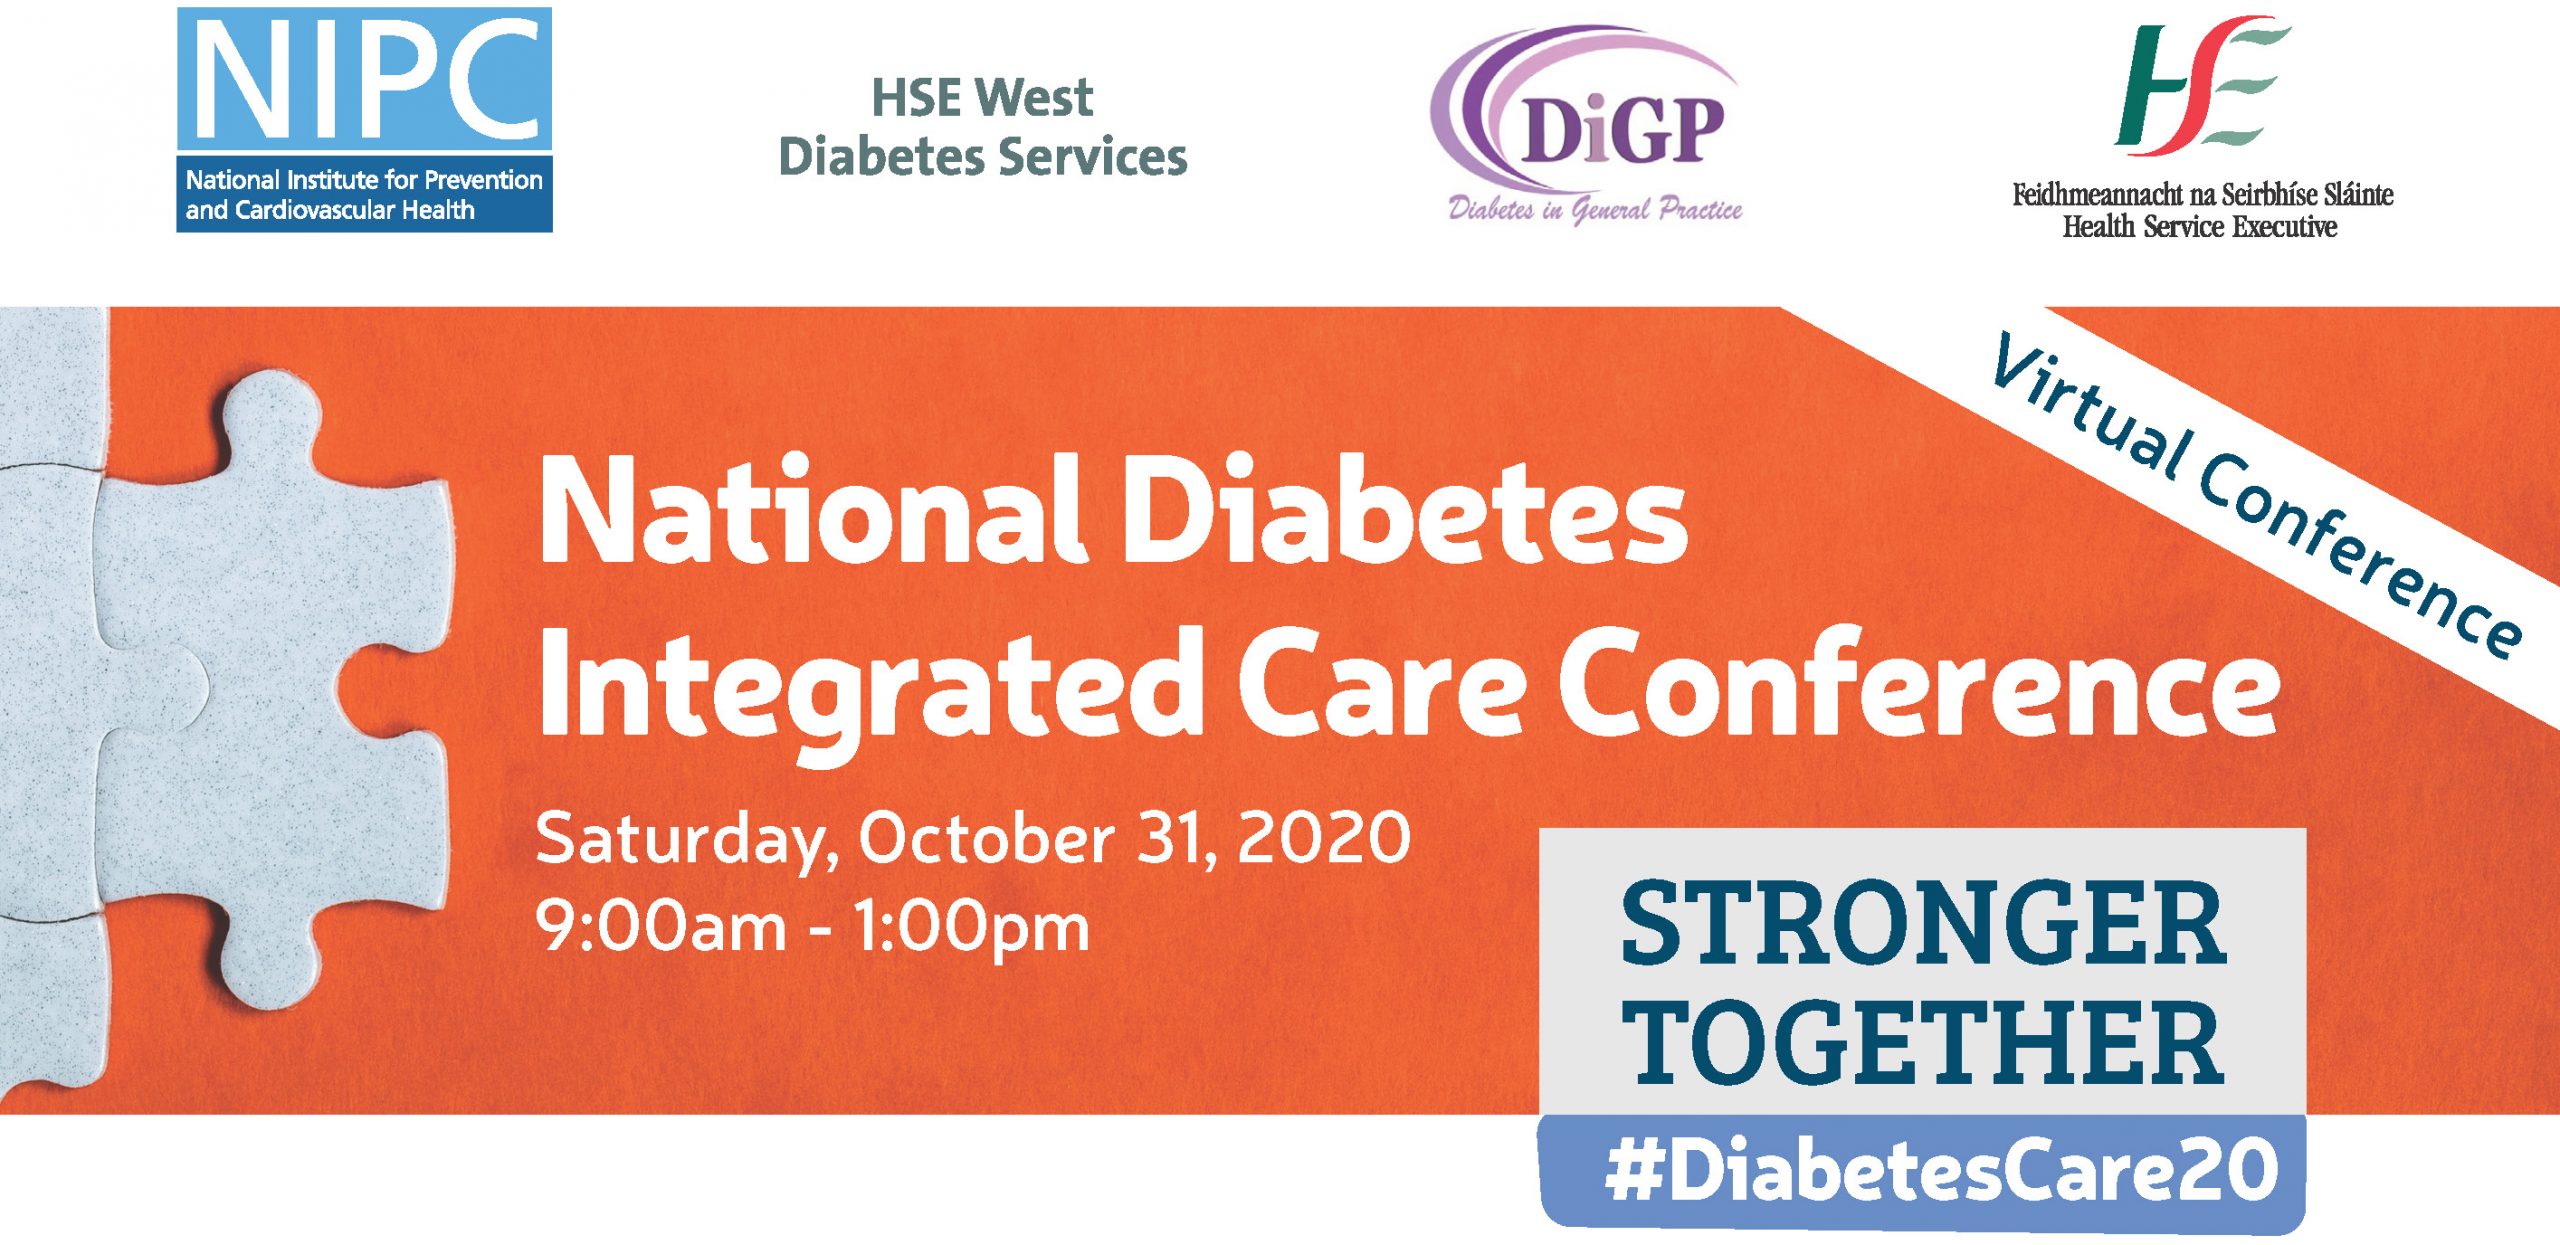 National Diabetes Integrated Care Conference NIPC National